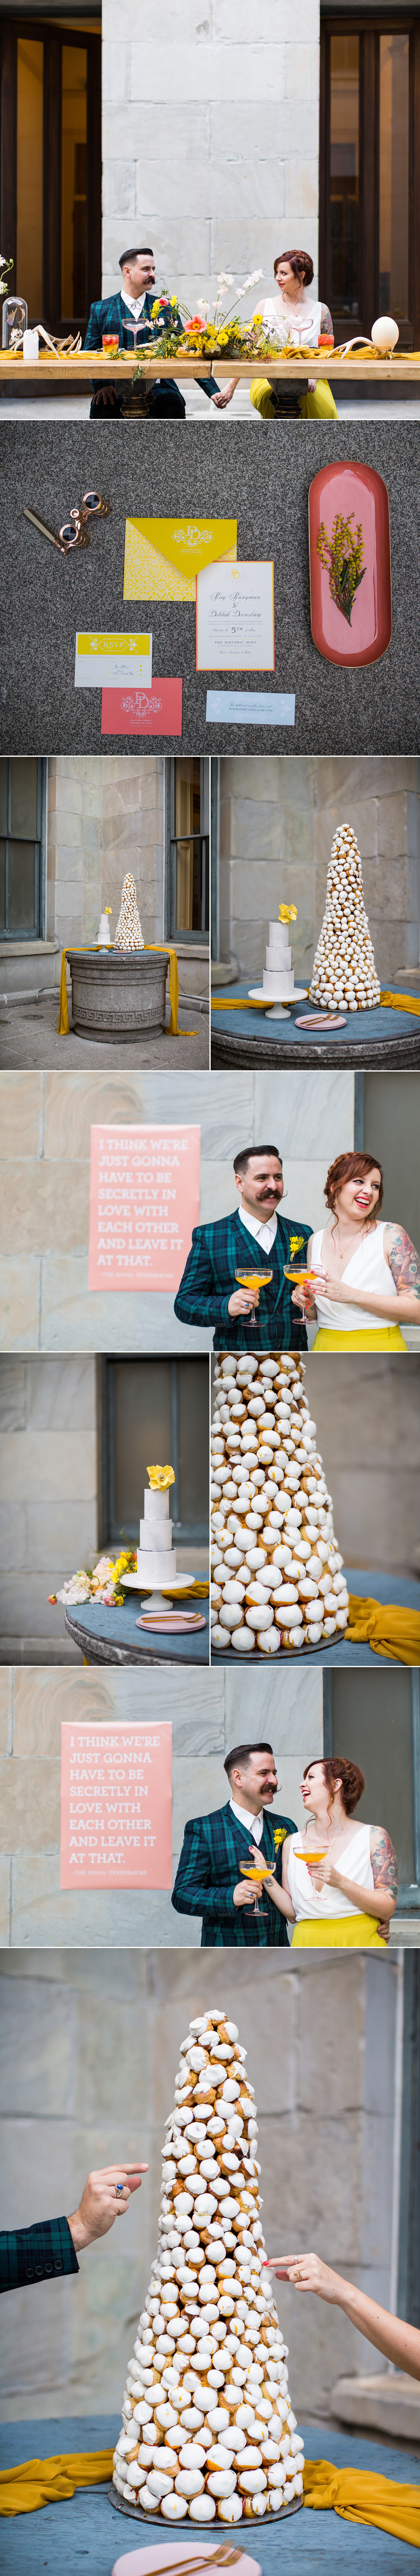 Wes Anderson inspired engagement shoot - 100 Layer Cake